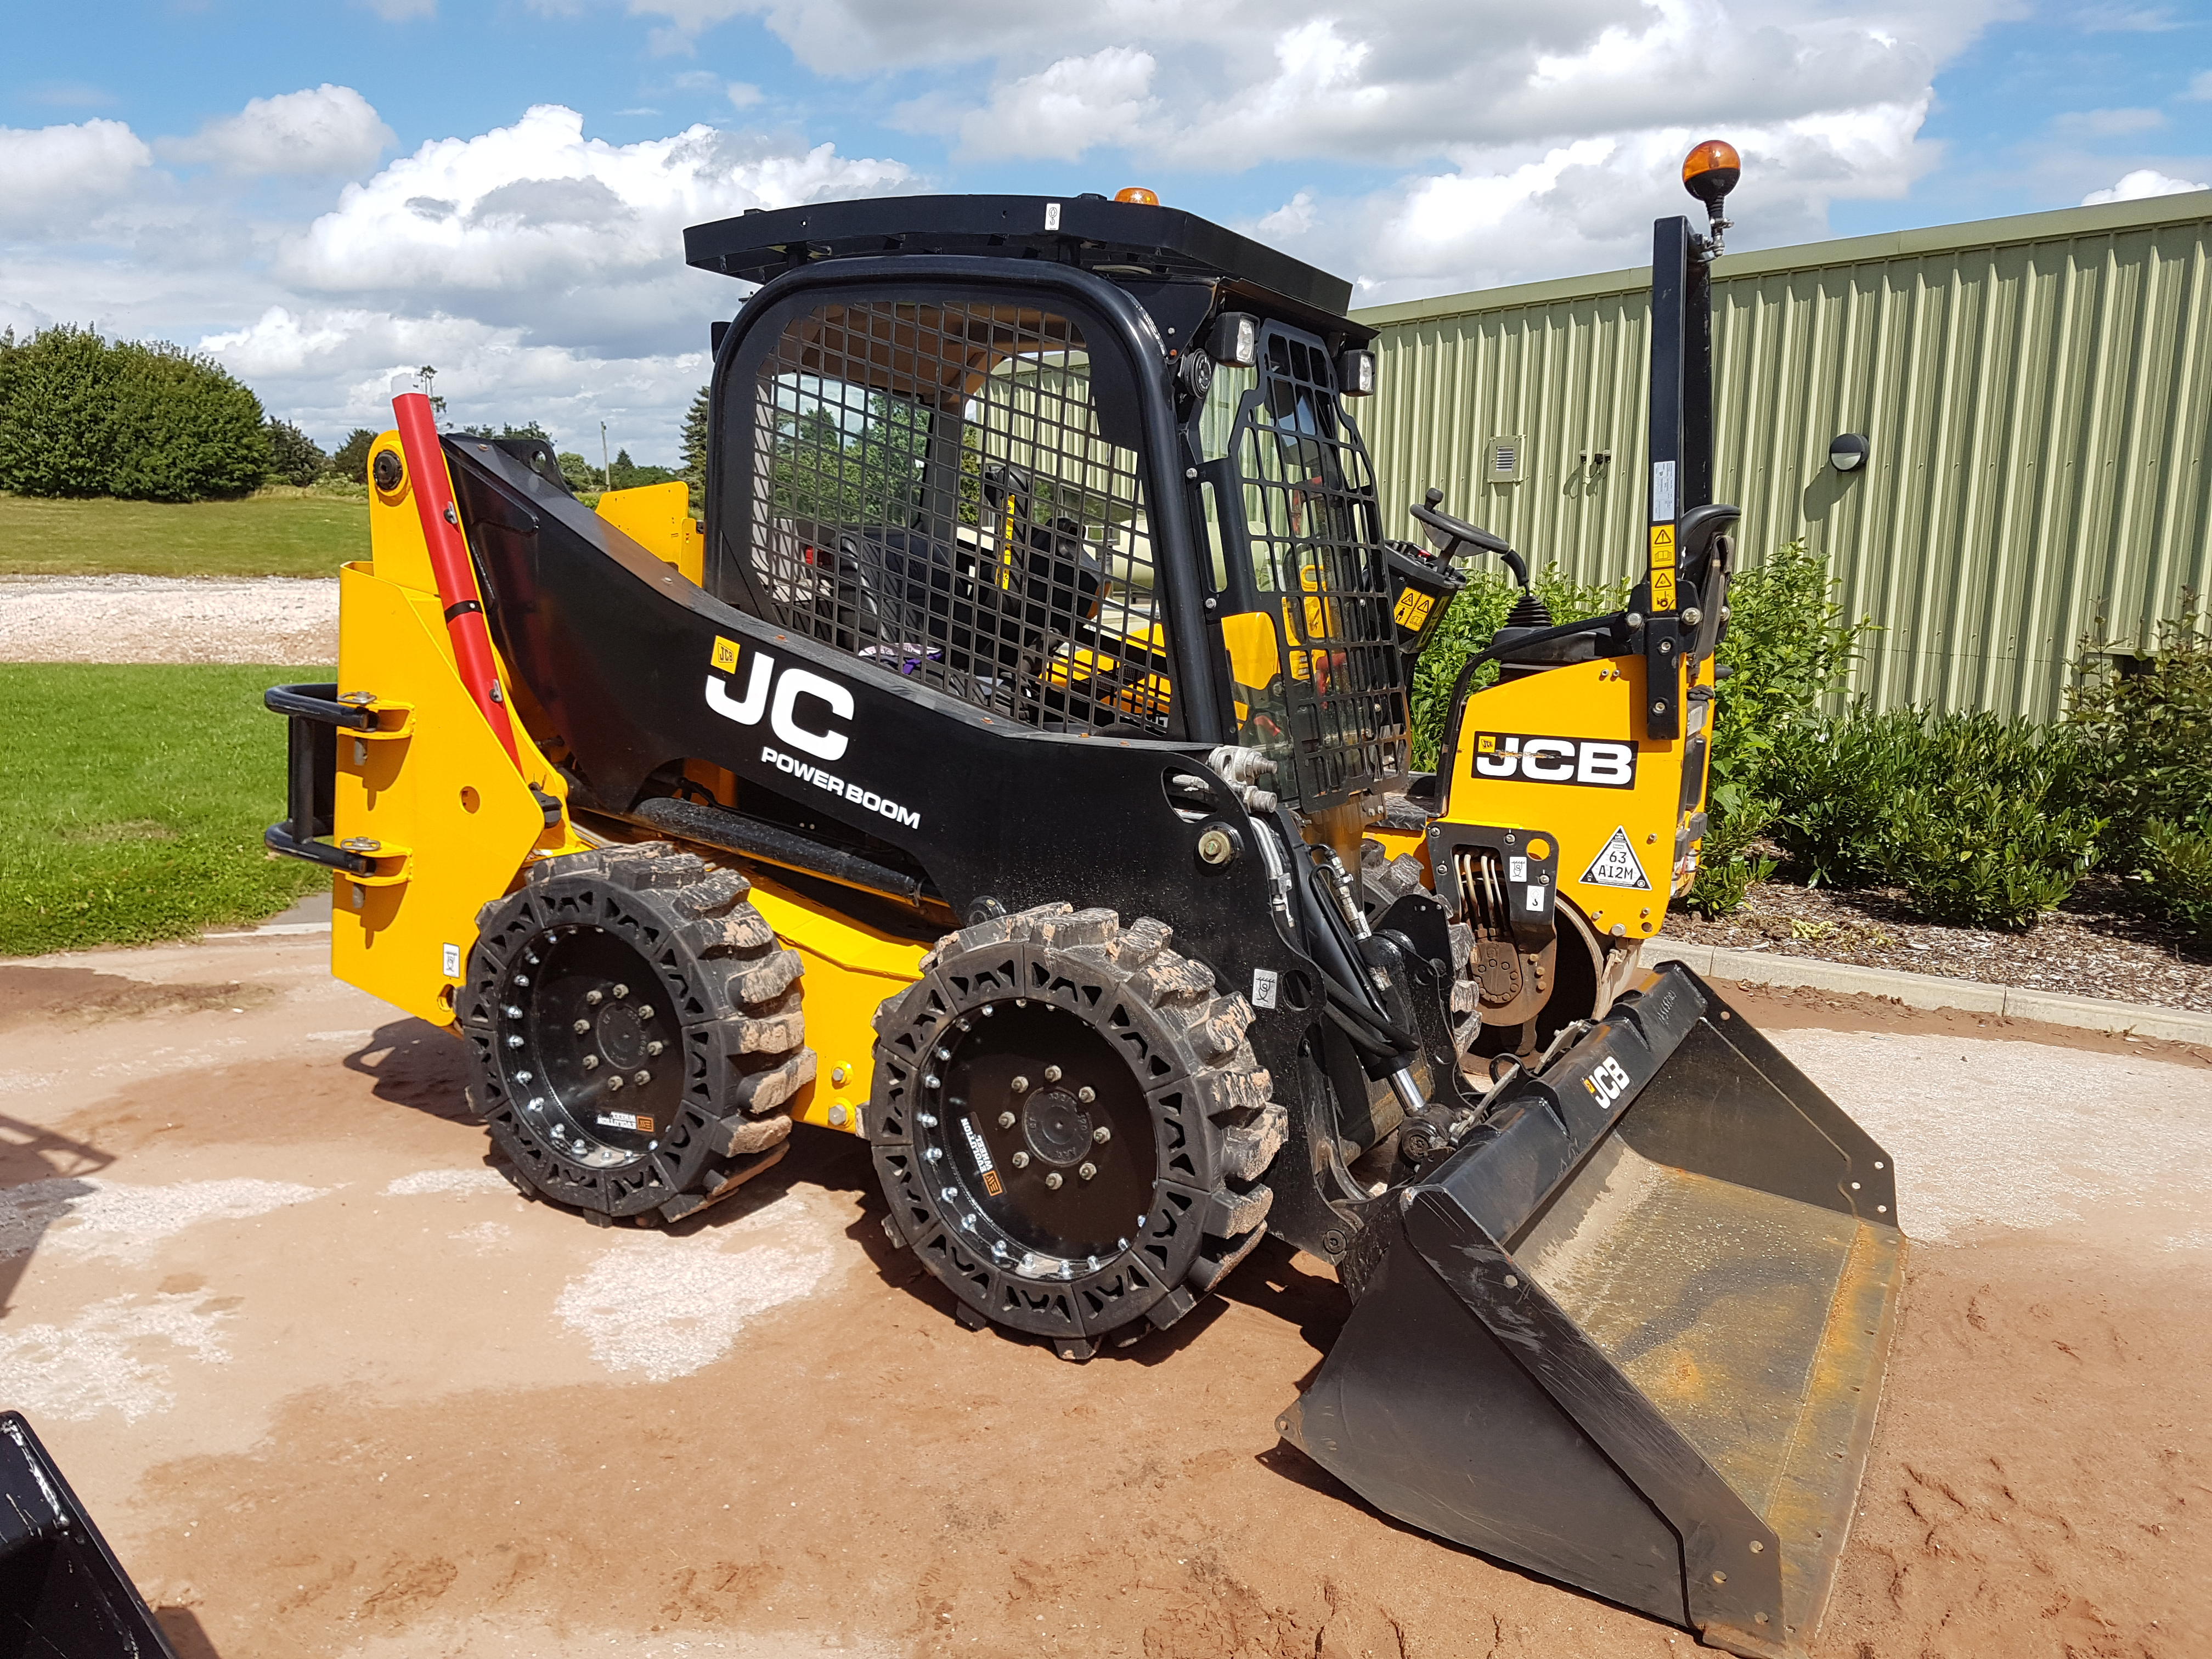 This images shows a yellow JCB Skid Steer using our14x17.5 Solid Skid Steer Tires